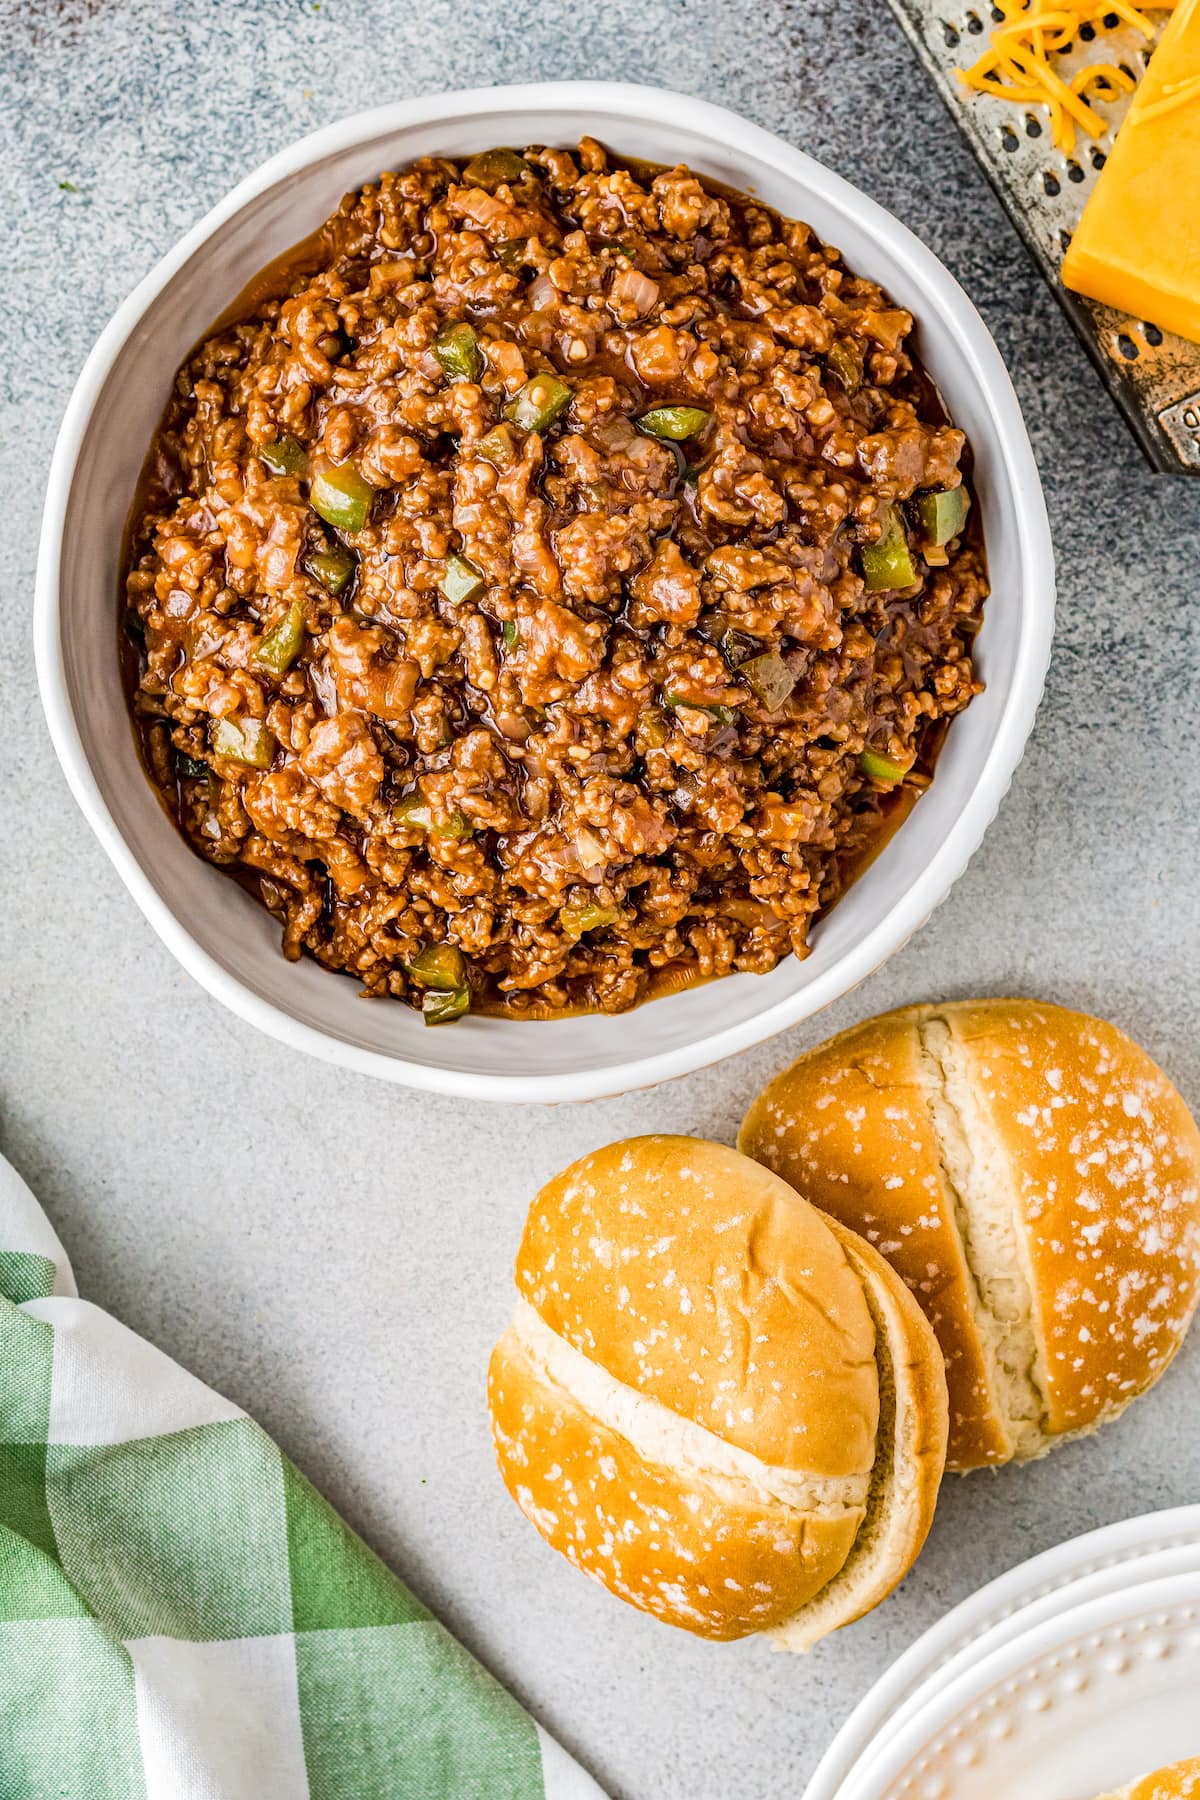 sloppy joe mix in a small casserole dish with two buns next to it